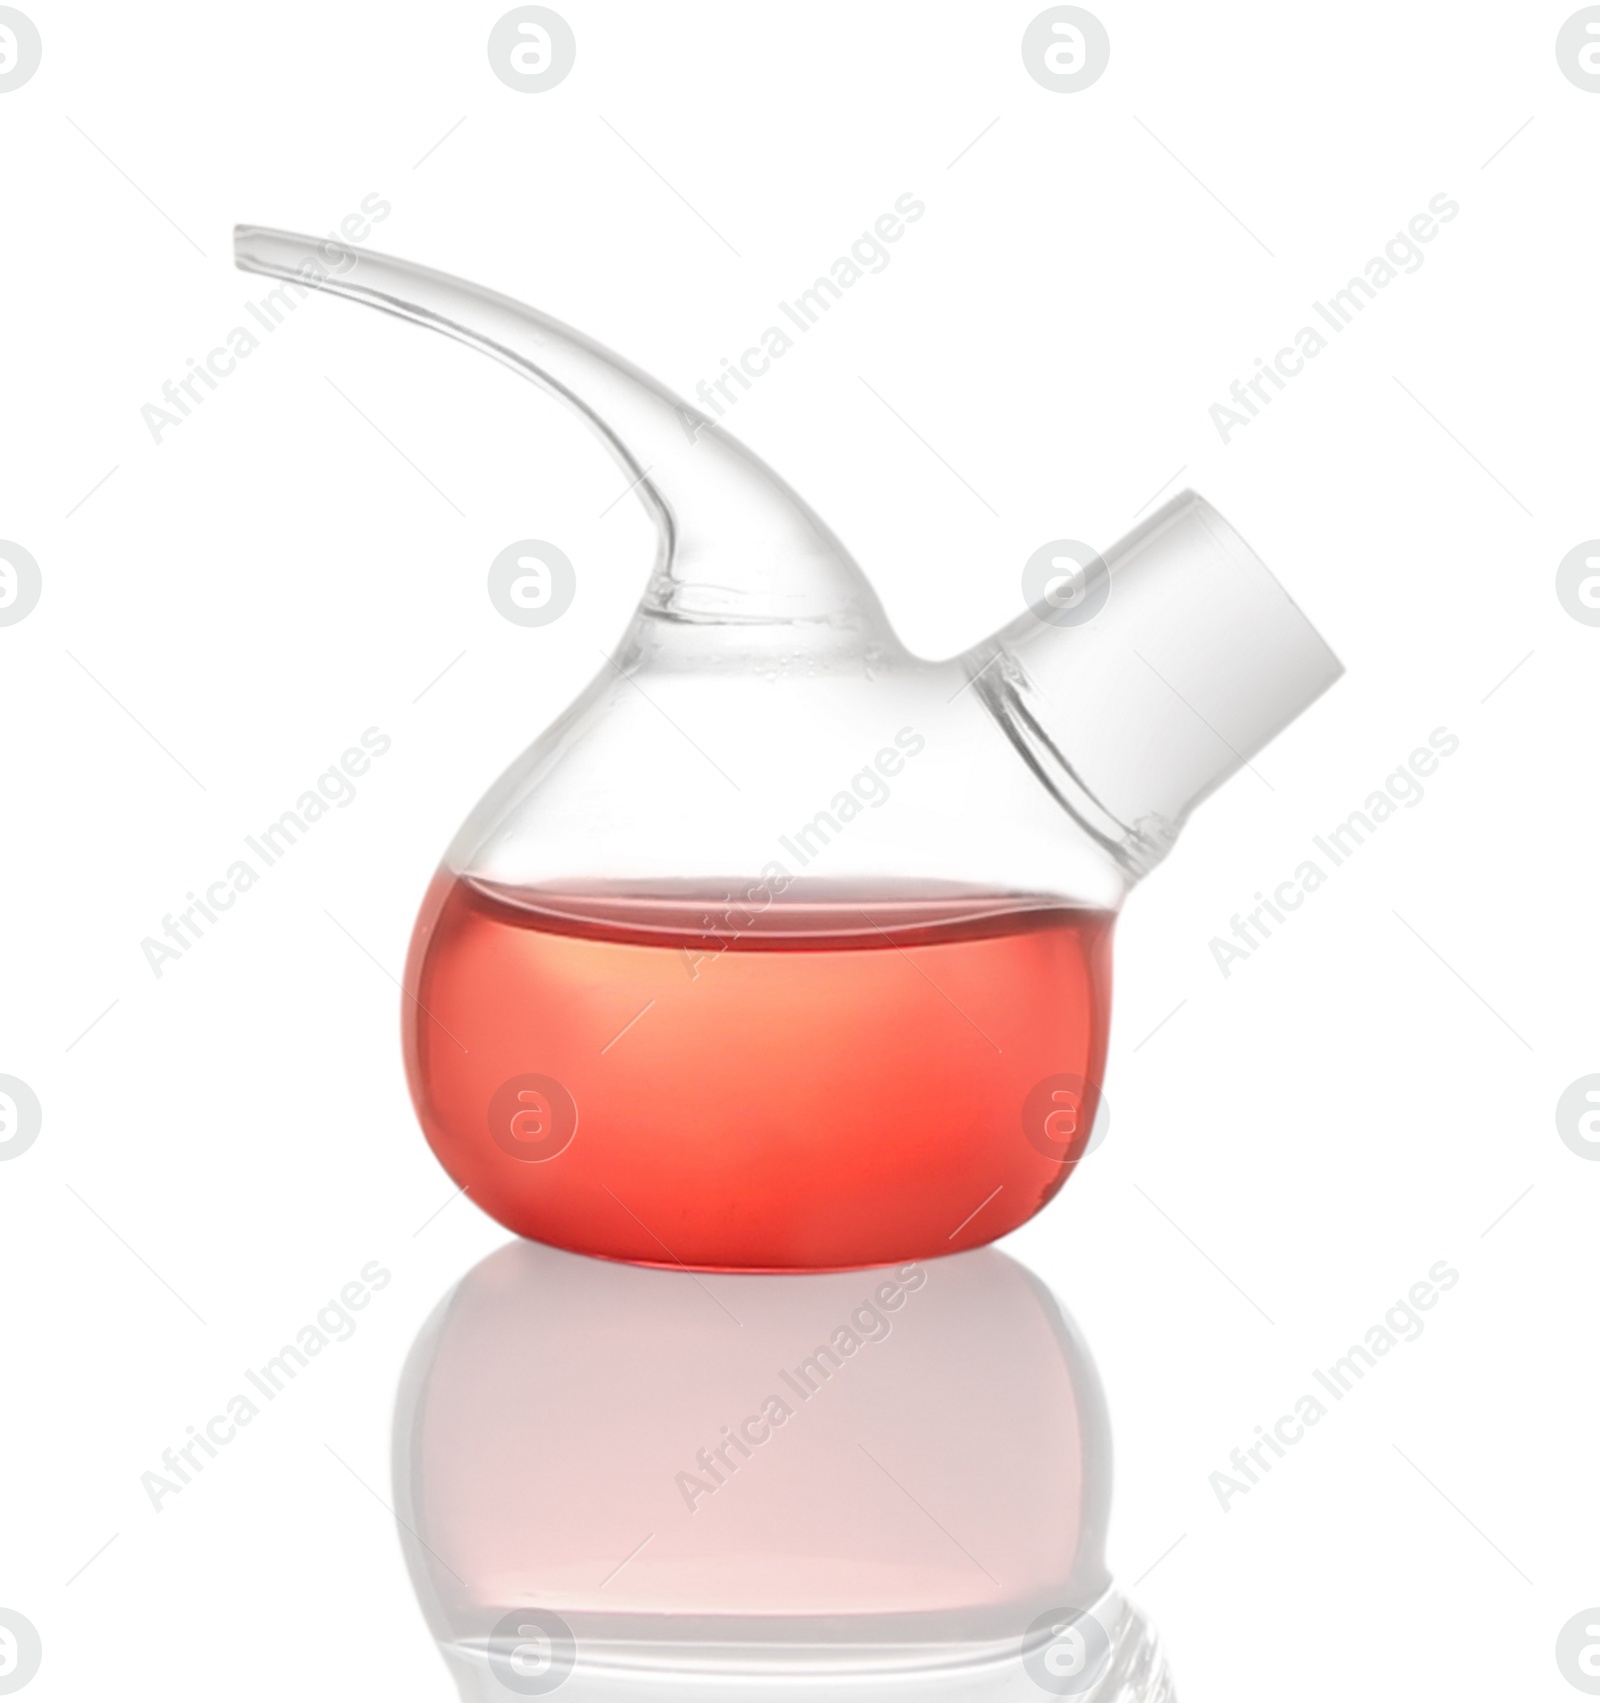 Photo of Retort flask with red liquid isolated on white